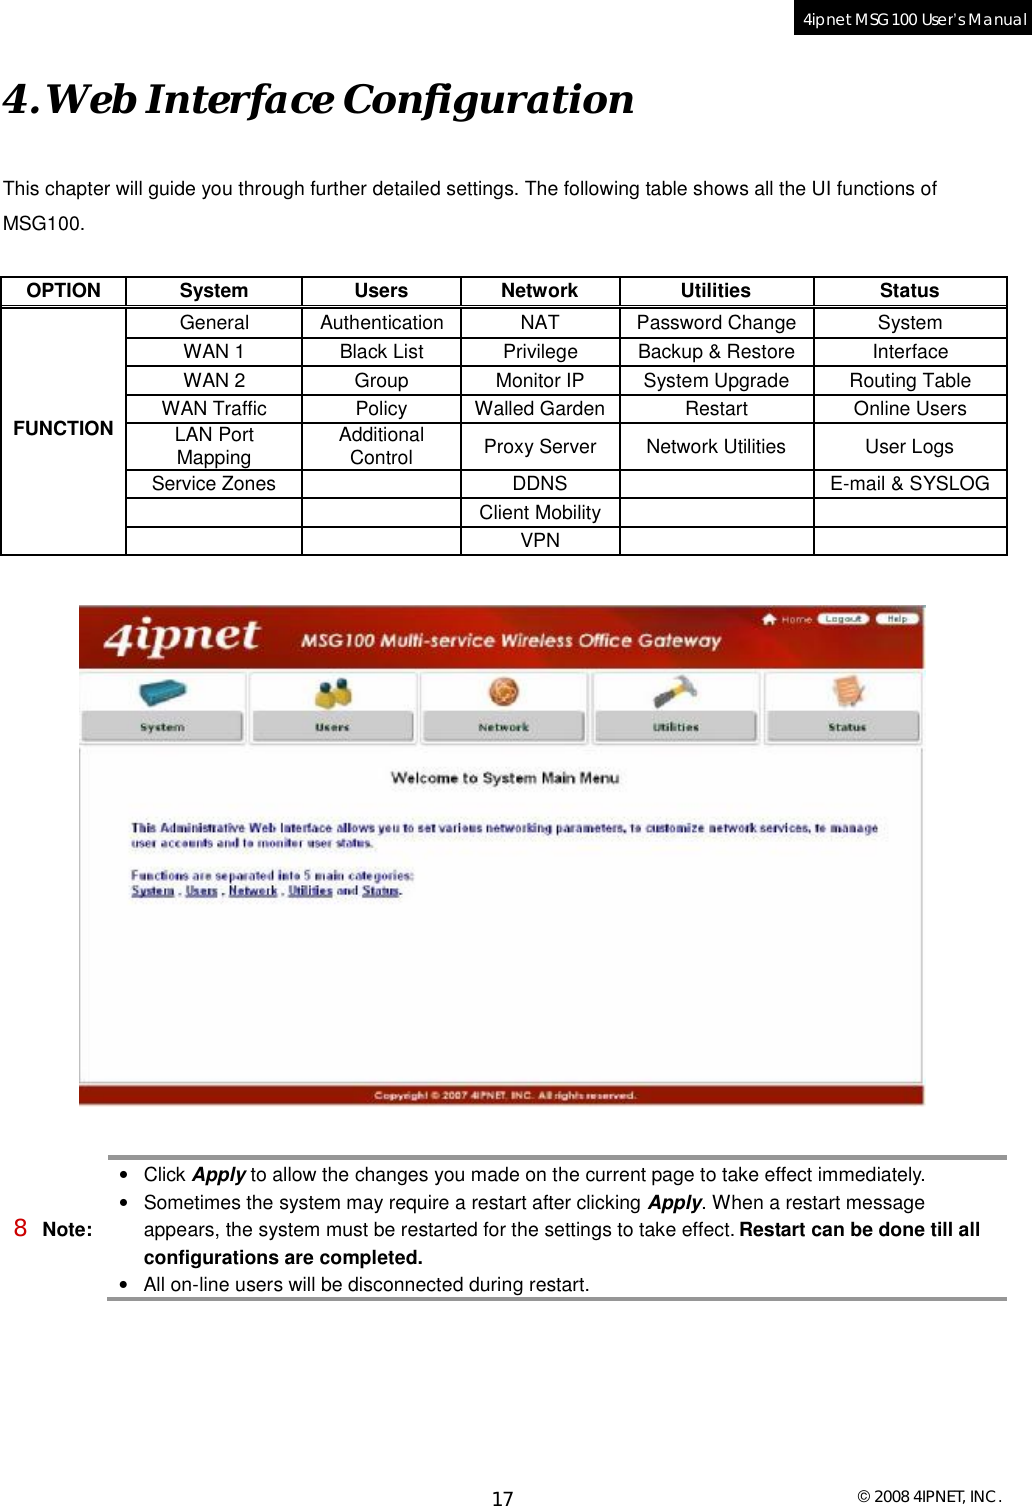  © 2008 4IPNET, INC. 17 4ipnet MSG100 User’s Manual  4. Web Interface Configuration This chapter will guide you through further detailed settings. The following table shows all the UI functions of MSG100.  OPTION System Users Network Utilities Status General Authentication NAT Password Change System WAN 1 Black List Privilege Backup &amp; Restore Interface WAN 2 Group Monitor IP System Upgrade Routing Table WAN Traffic  Policy Walled Garden Restart Online Users LAN Port Mapping  Additional Control  Proxy Server Network Utilities User Logs Service Zones   DDNS   E-mail &amp; SYSLOG    Client Mobility     FUNCTION      VPN        8 Note: • Click Apply to allow the changes you made on the current page to take effect immediately. • Sometimes the system may require a restart after clicking Apply. When a restart message appears, the system must be restarted for the settings to take effect. Restart can be done till all configurations are completed. • All on-line users will be disconnected during restart. 